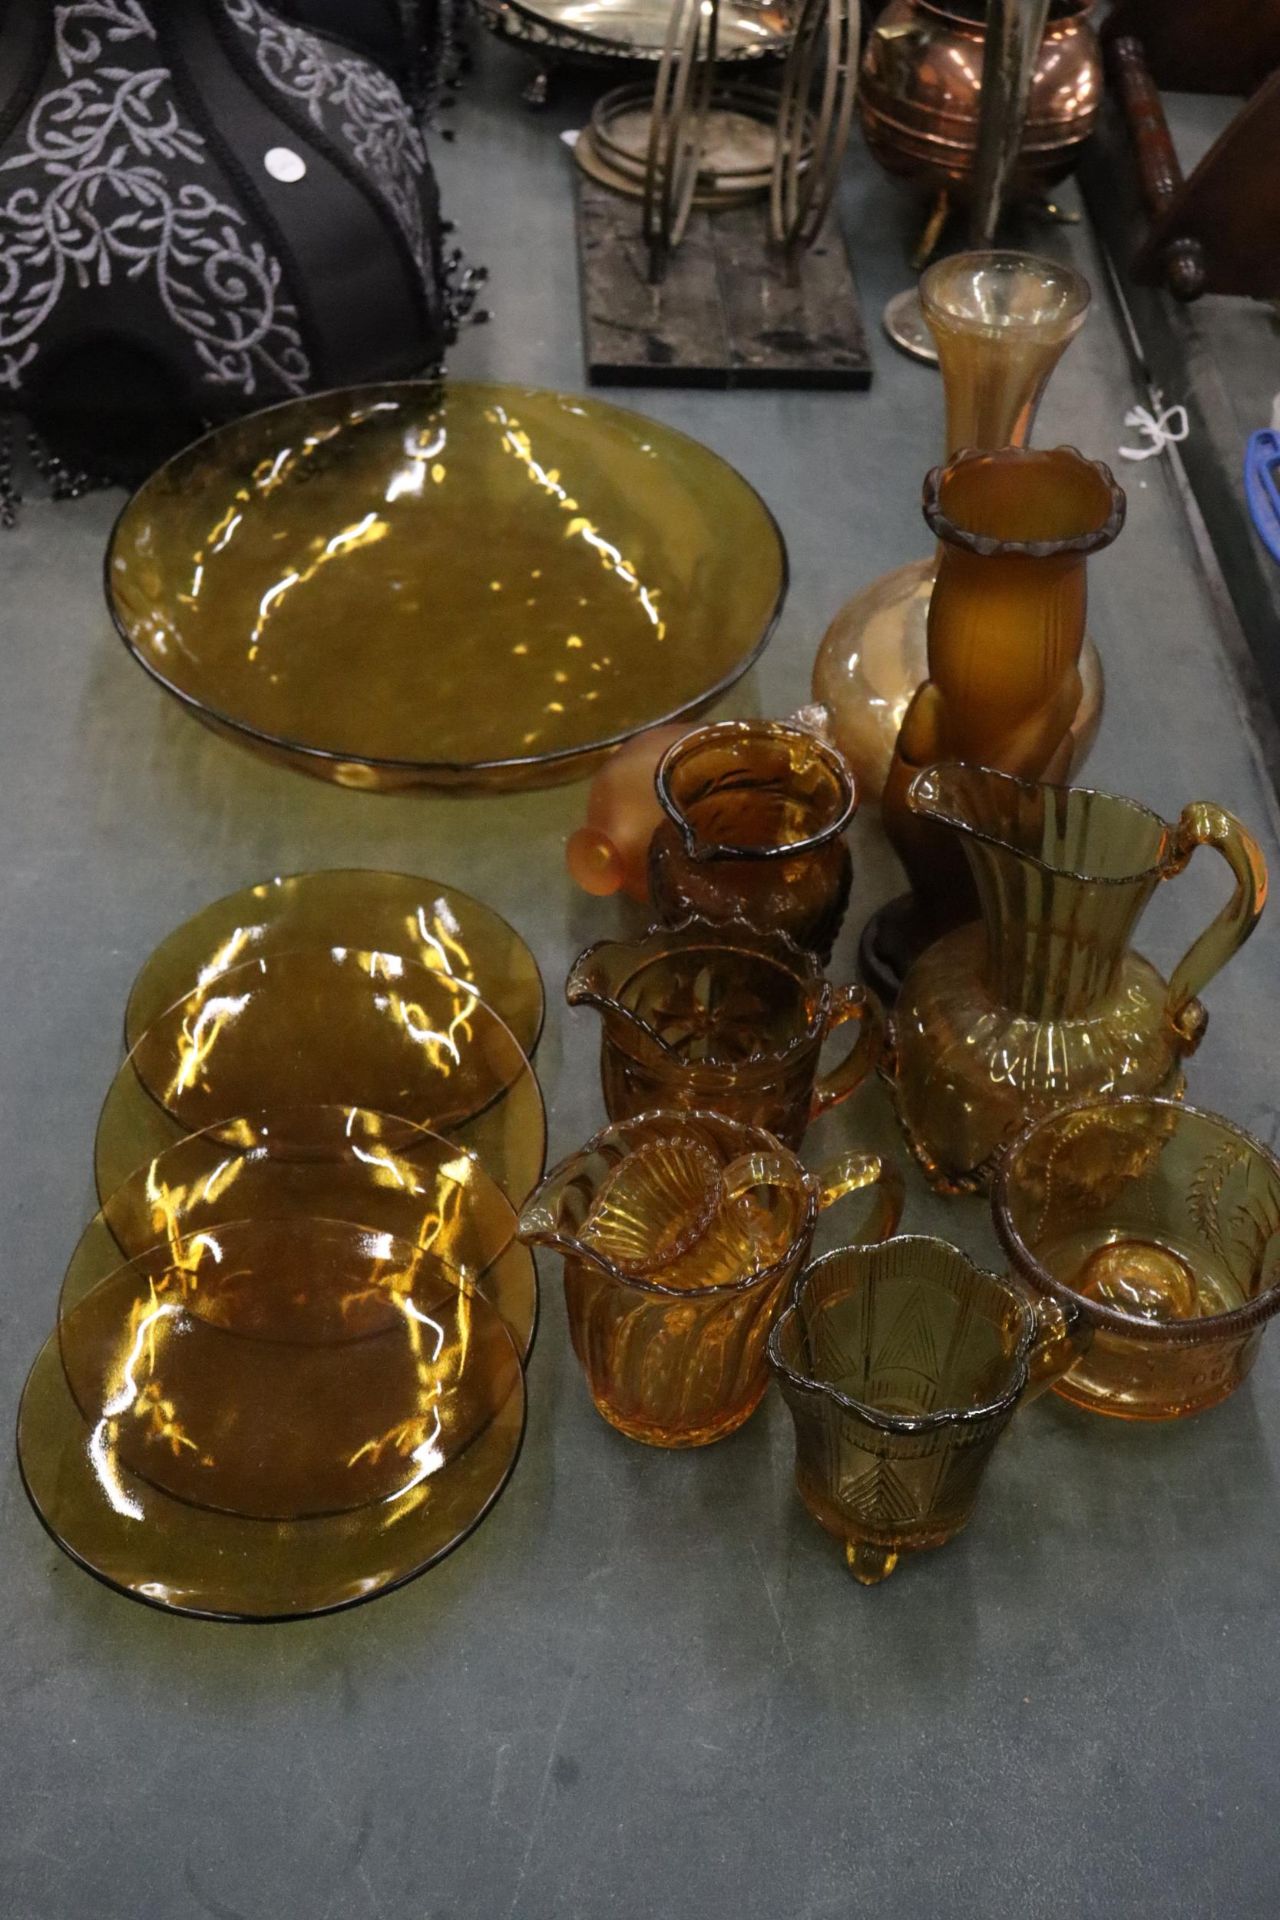 A QUANTITY OF AMBER COLOURED GLASS TO INCLUDE VASES, PLATES, JUGS, ETC.,